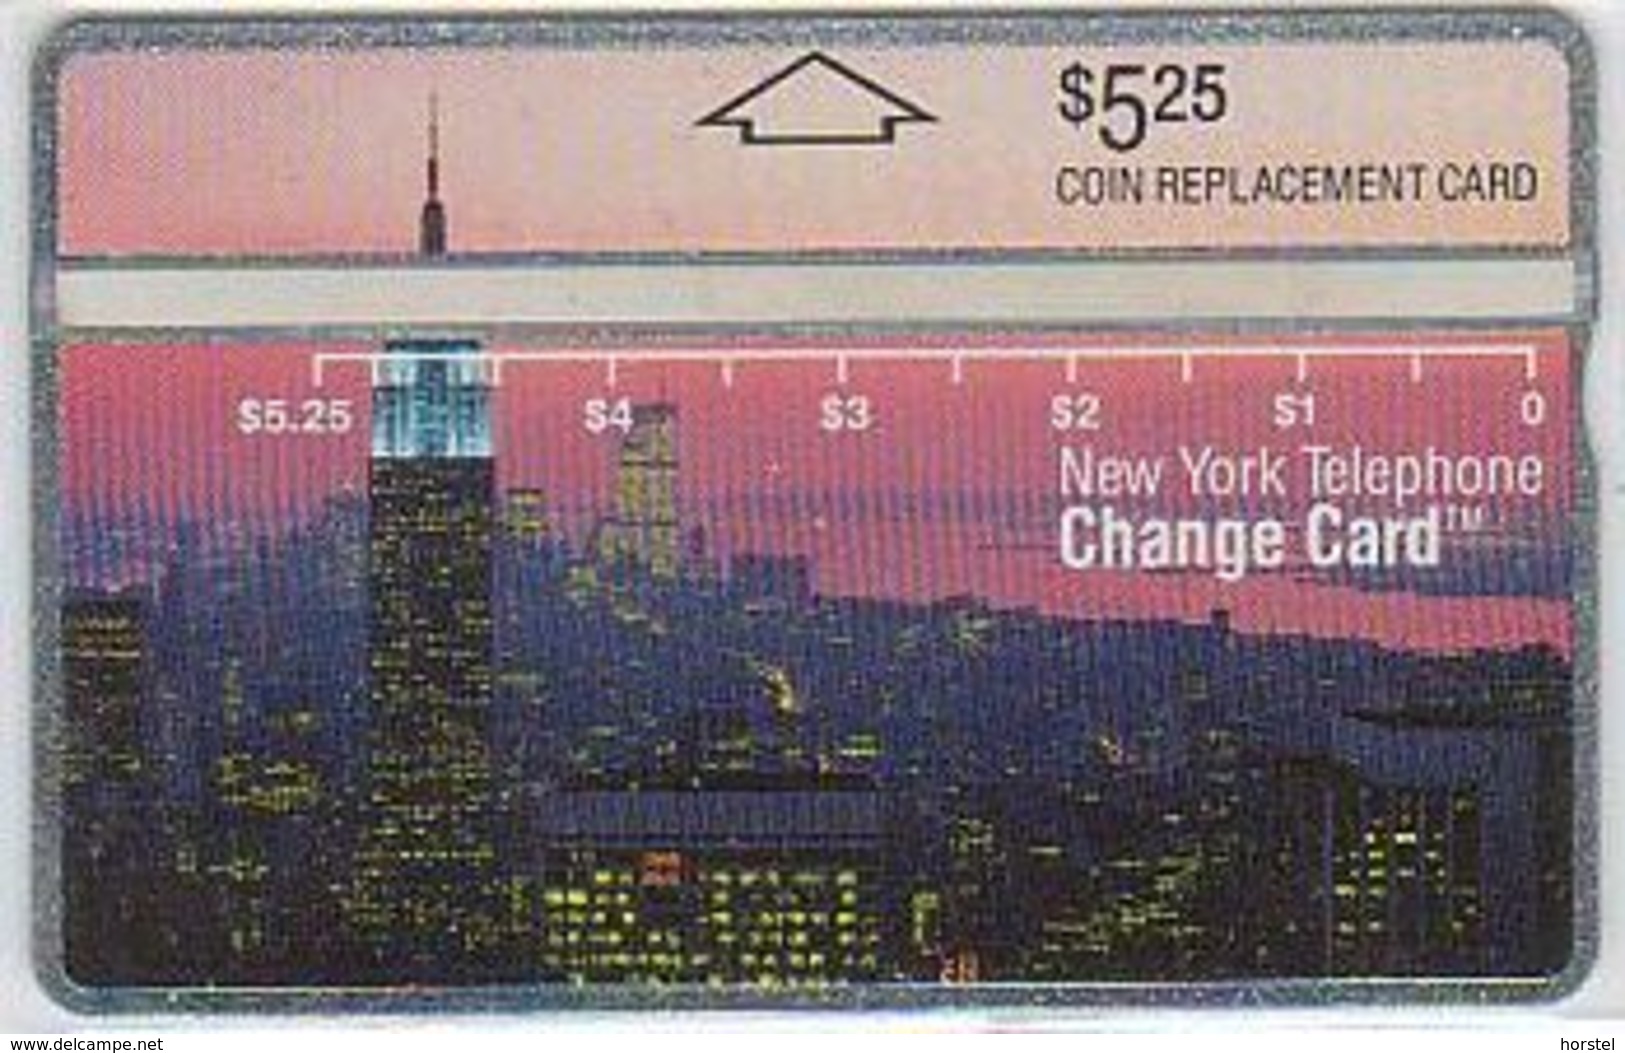 USA NYNEX NL-05 NYC By Night , White Letters, 210B, Mint - [1] Hologramkaarten